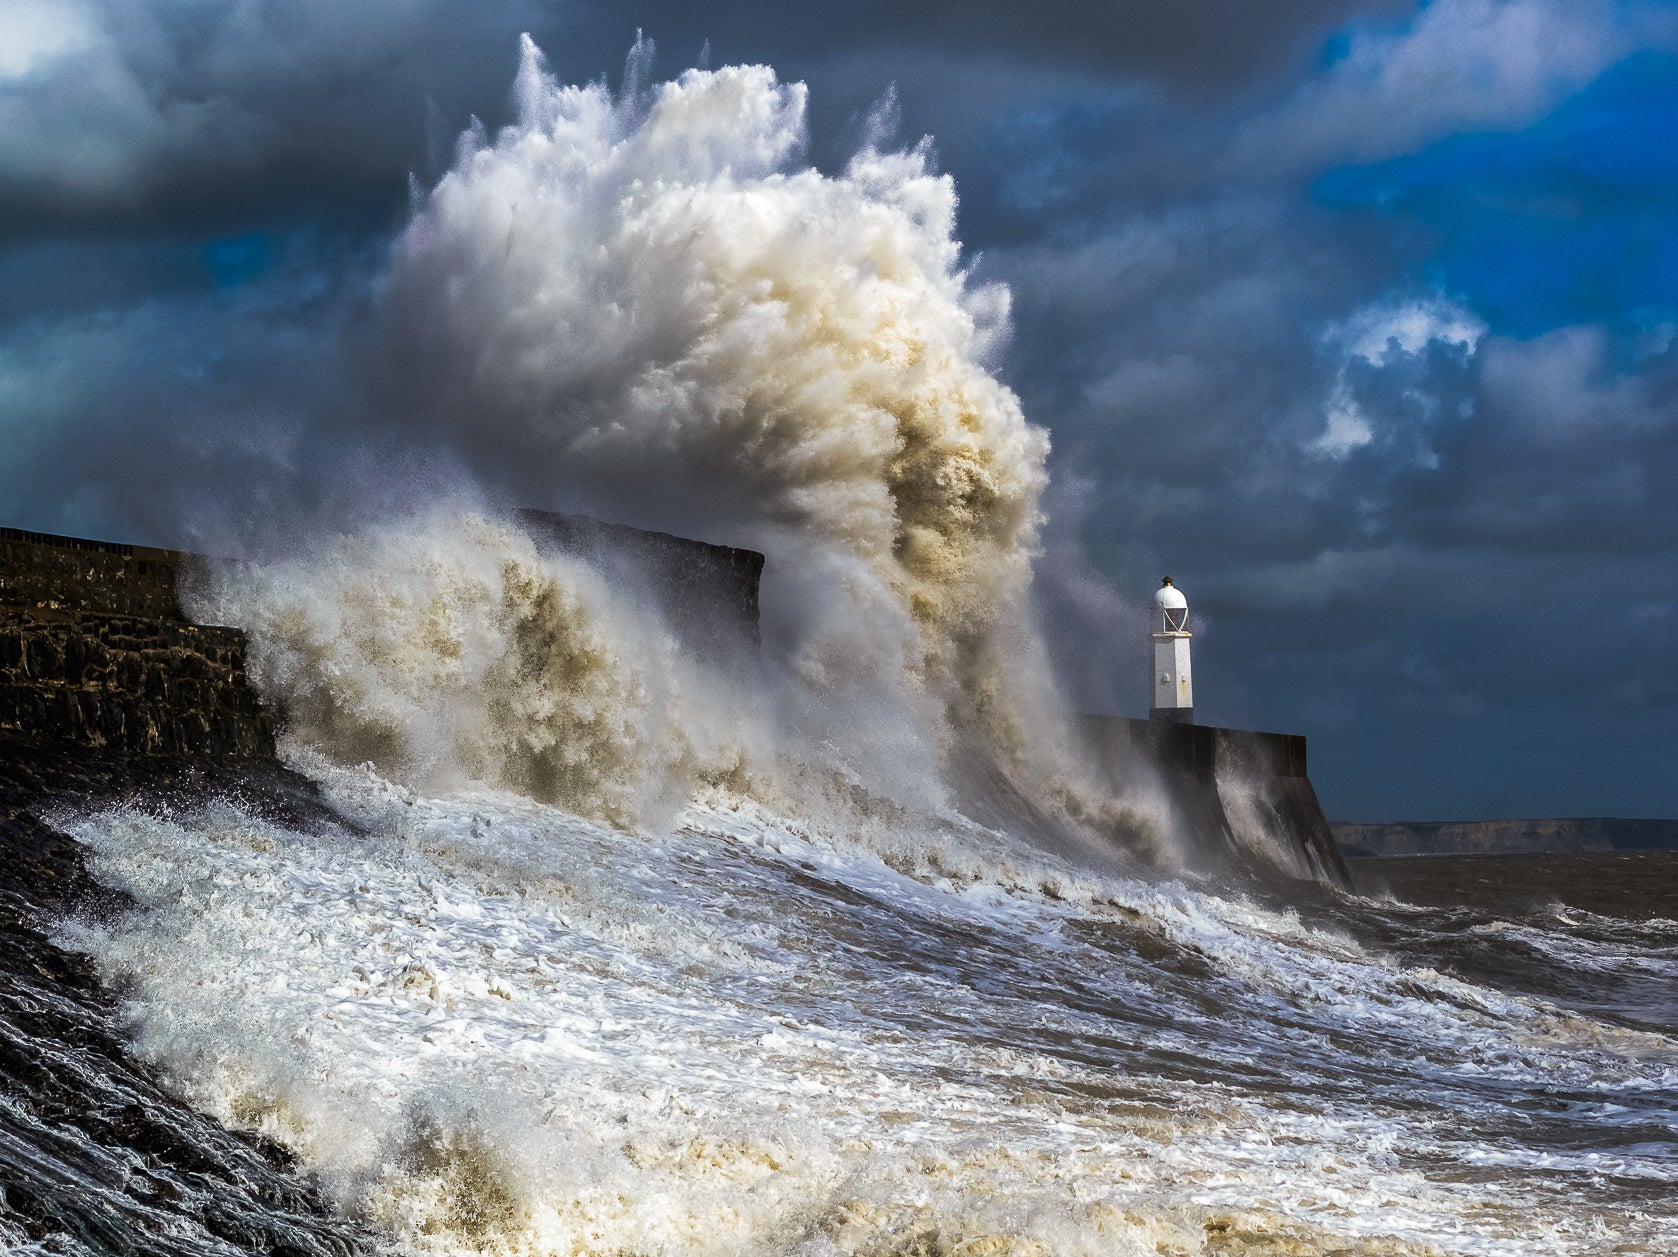 Storms Dudley and Eunice are set to batter the whole of the UK with winds up to 90mph